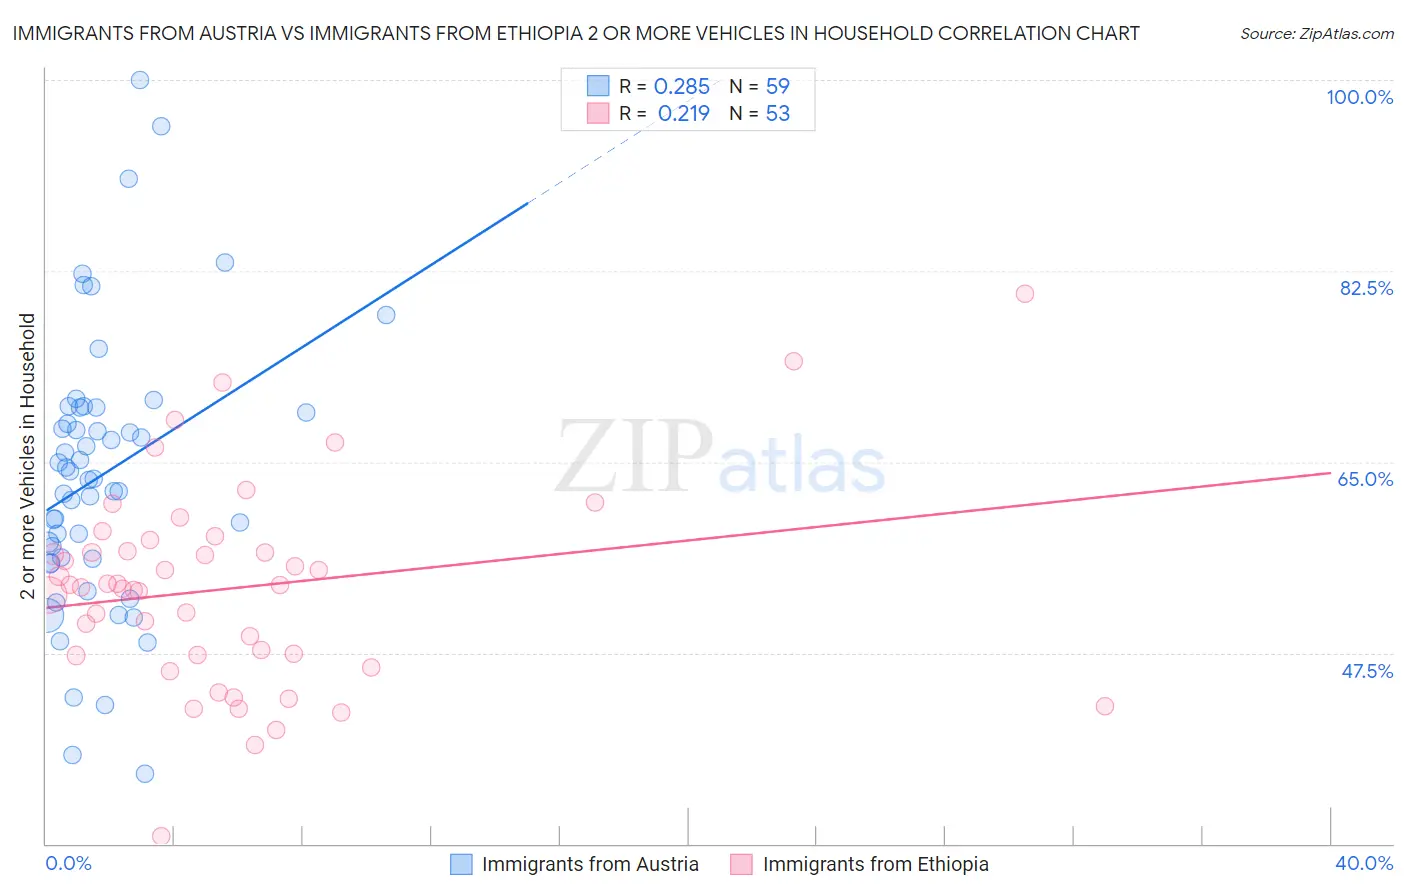 Immigrants from Austria vs Immigrants from Ethiopia 2 or more Vehicles in Household